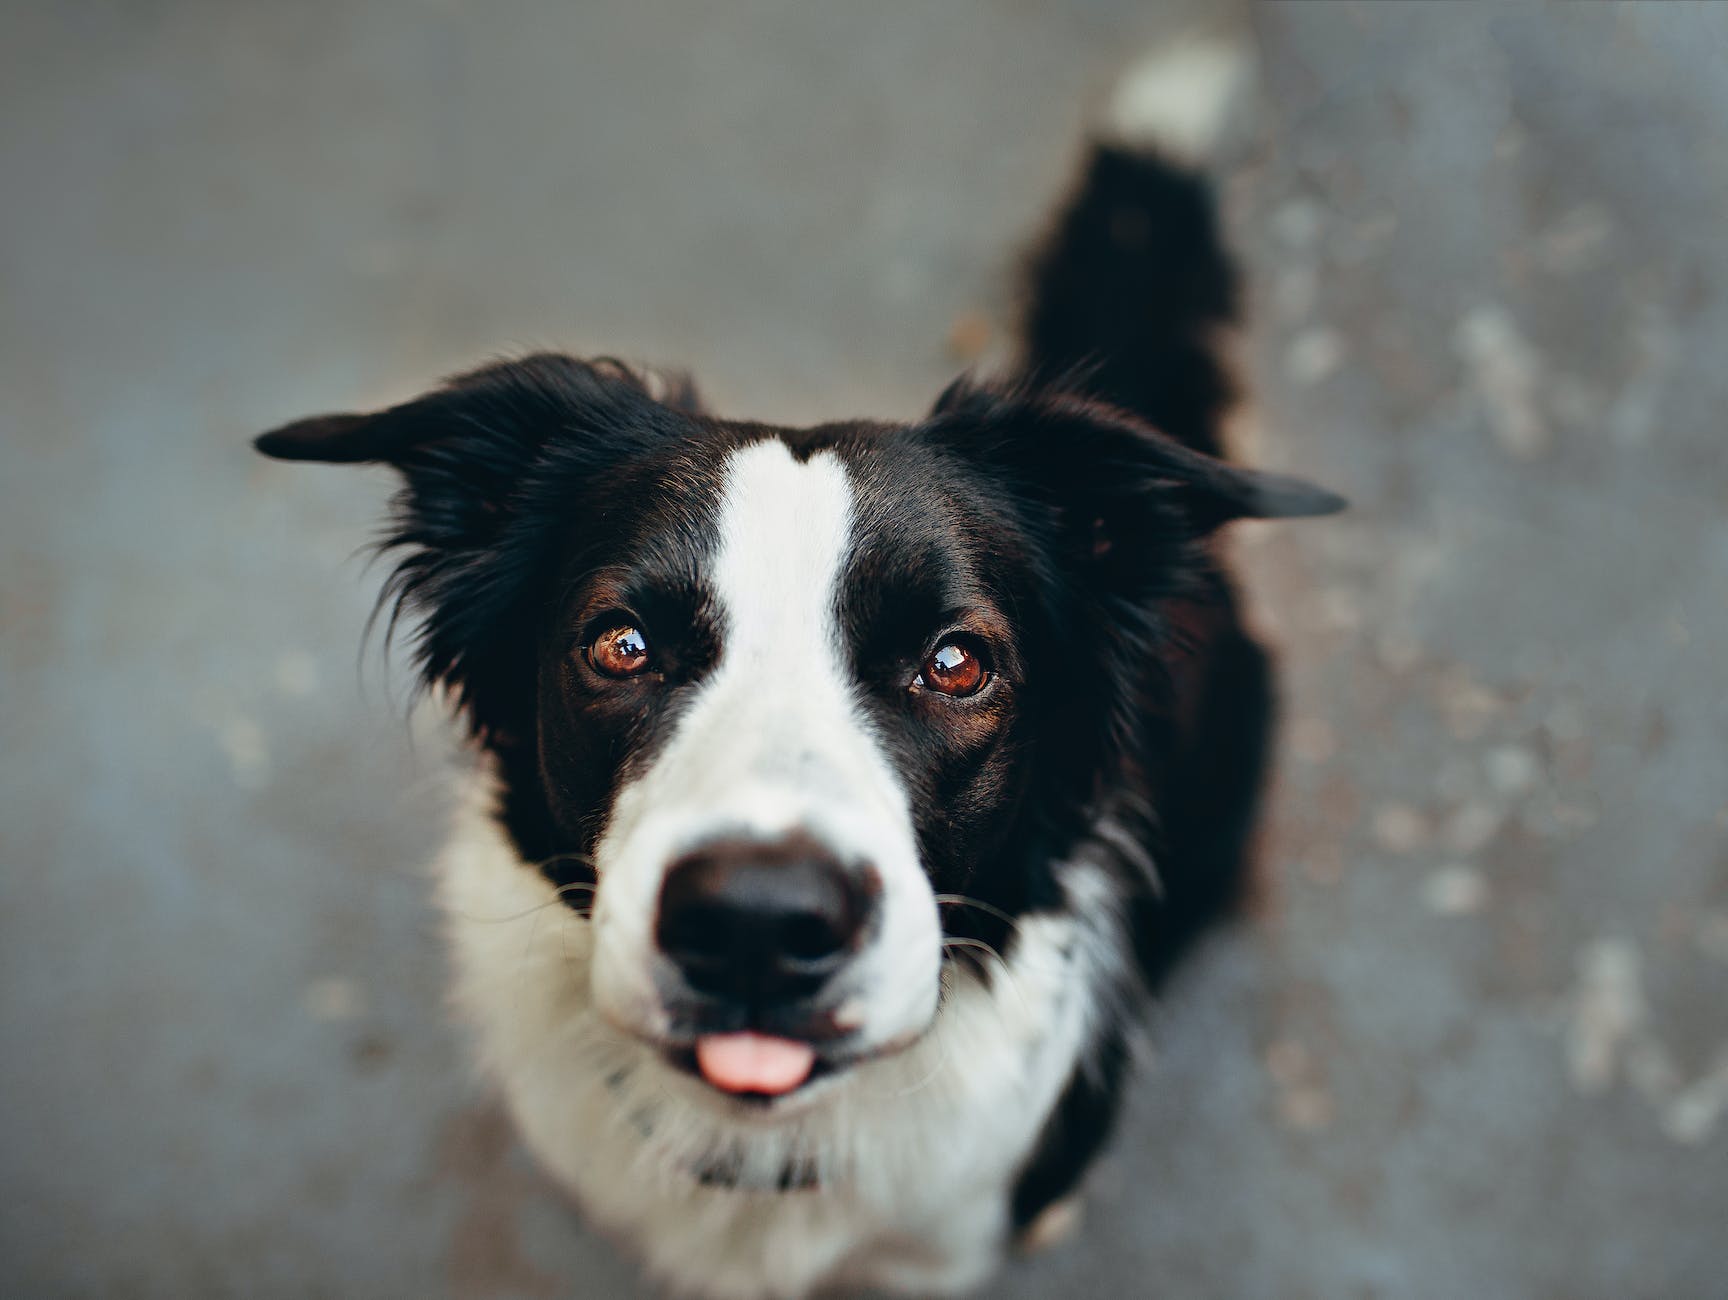 Black and white herding dog sticking out the tip of his tongue and looking very cute